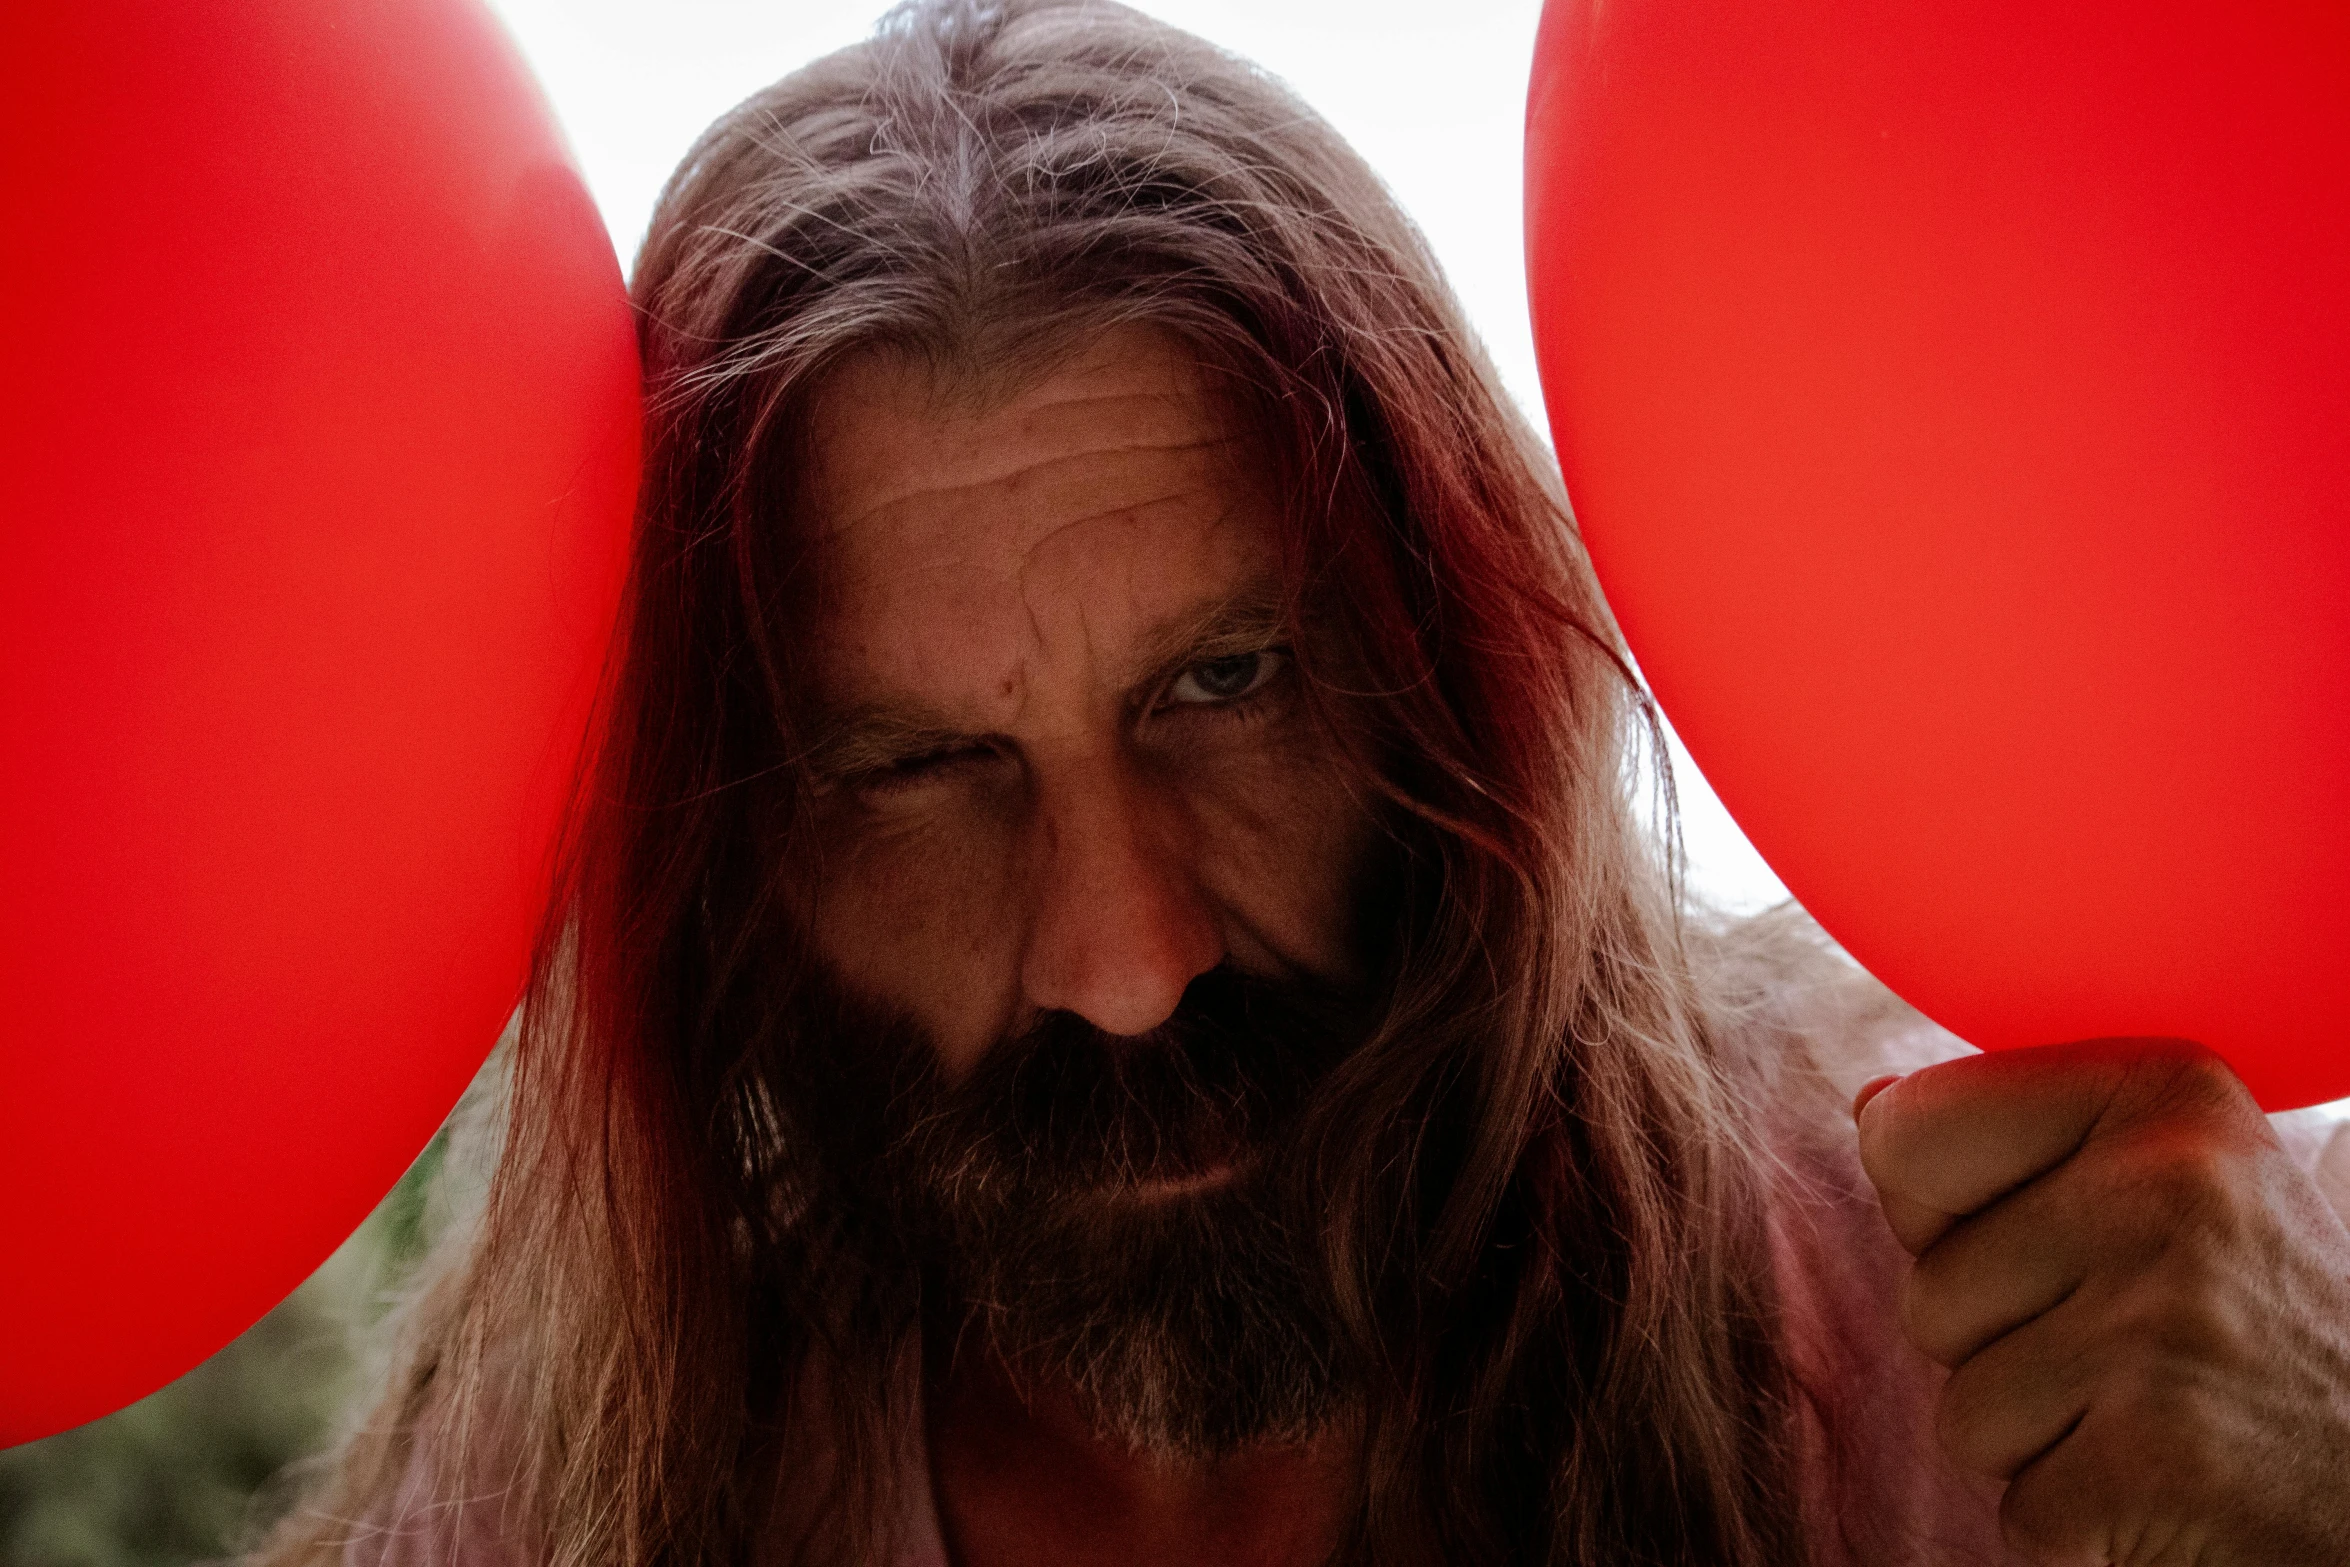 a man with long hair holding two large round red balloons